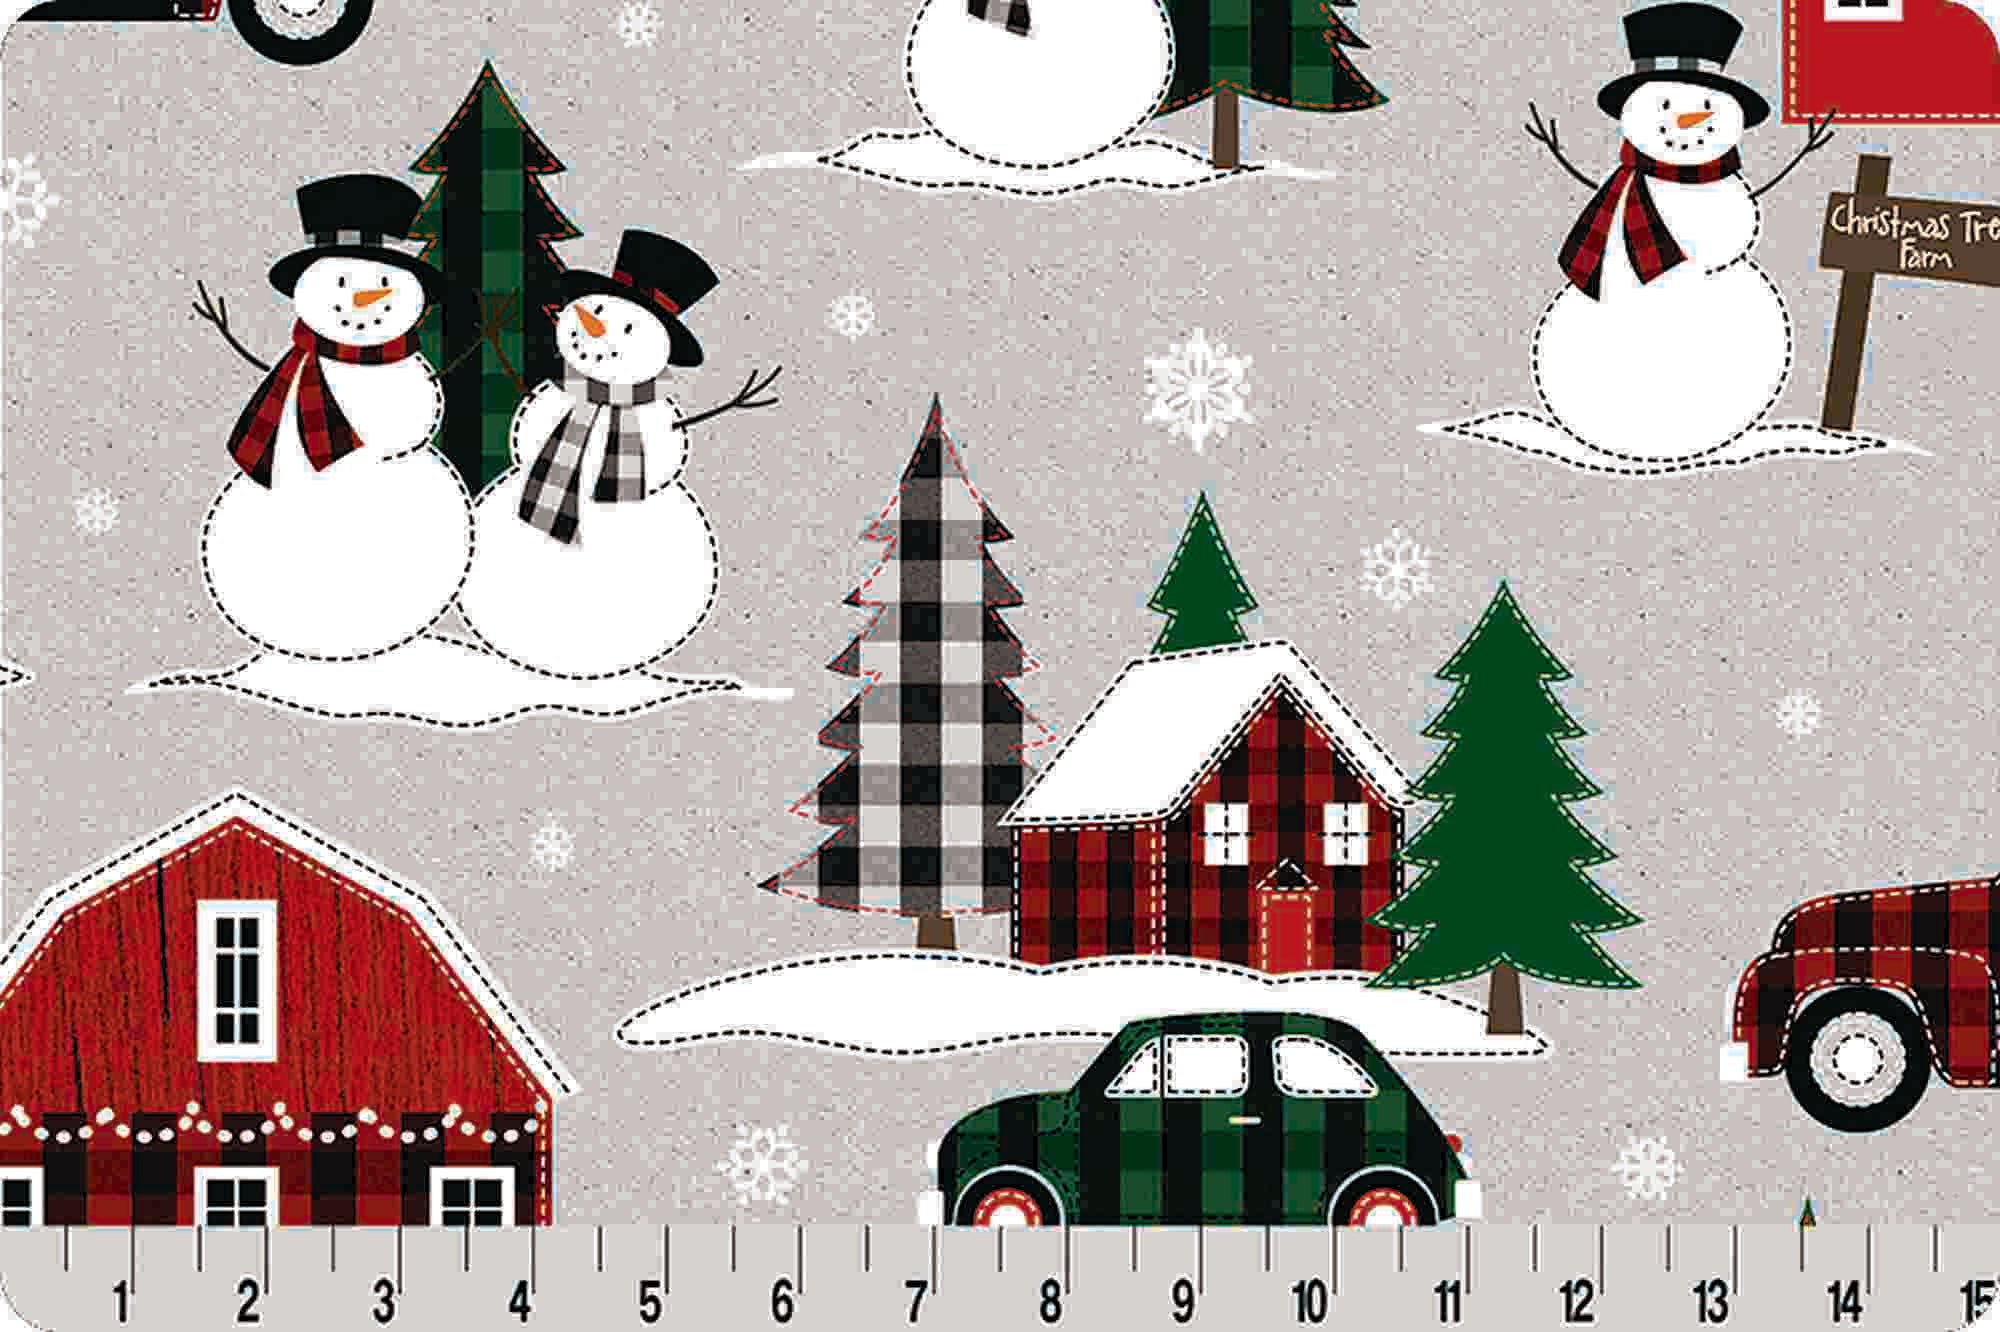 Shannon Fabrics Merry and Bright Digital Cuddle Chrome Minky Fabric (PRICE PER 1/2 YARD) - On Pins & Needles Quilting Co.